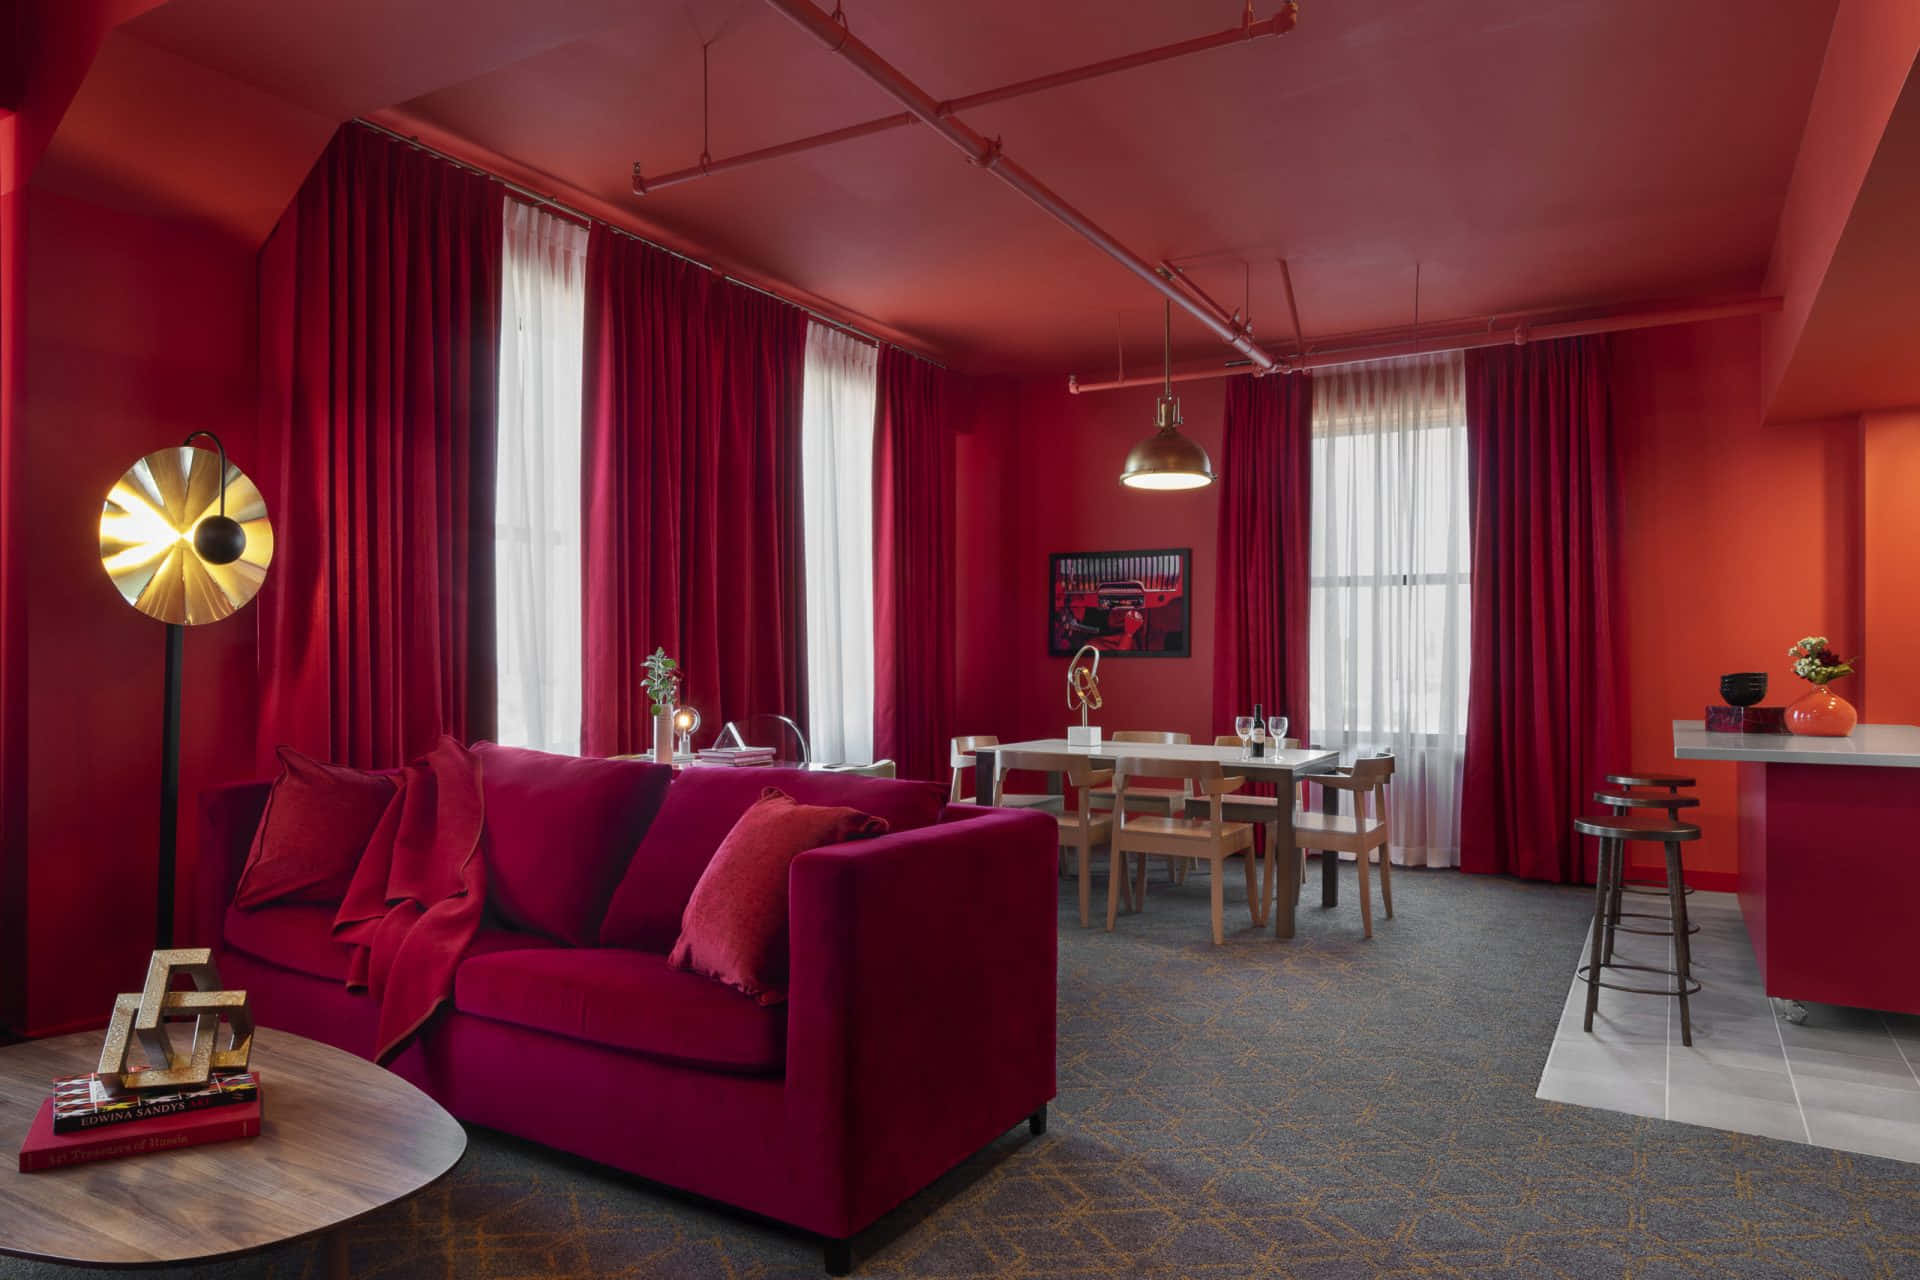 Deep, Mossy Colors in an Elegant Red Room